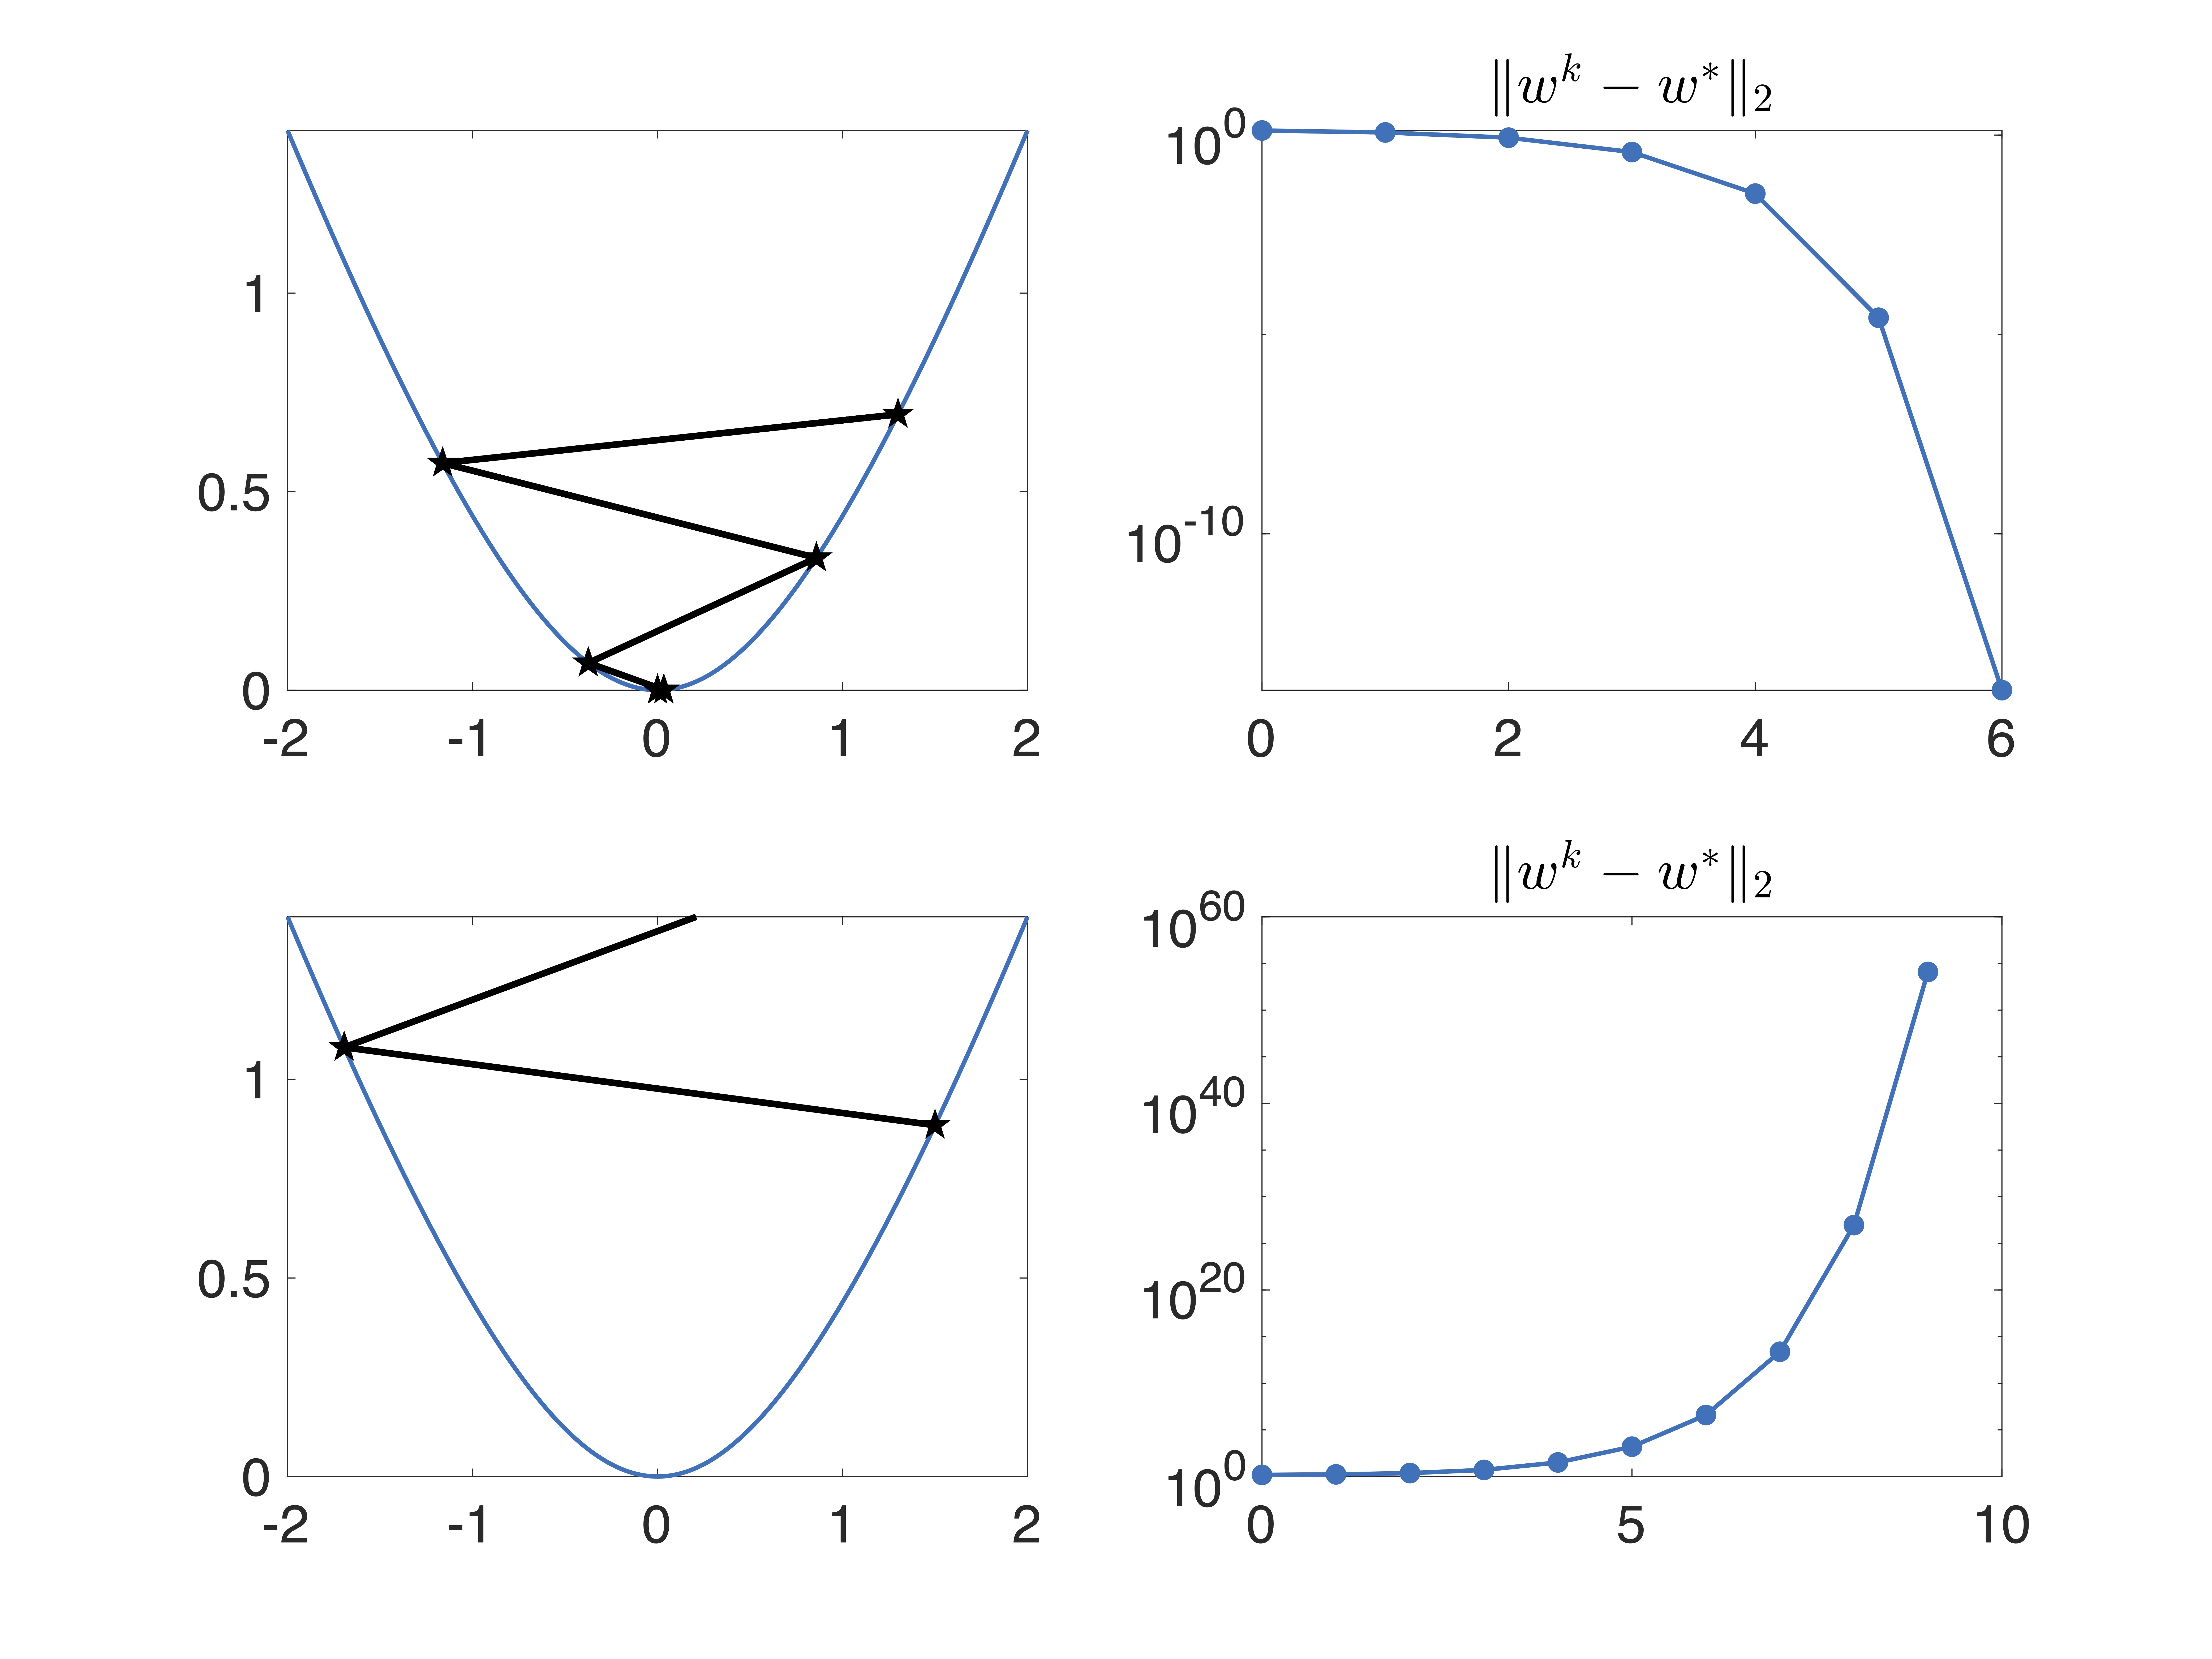 Figure 5: Example where Newton’s method converges or diverges depending on the starting point.